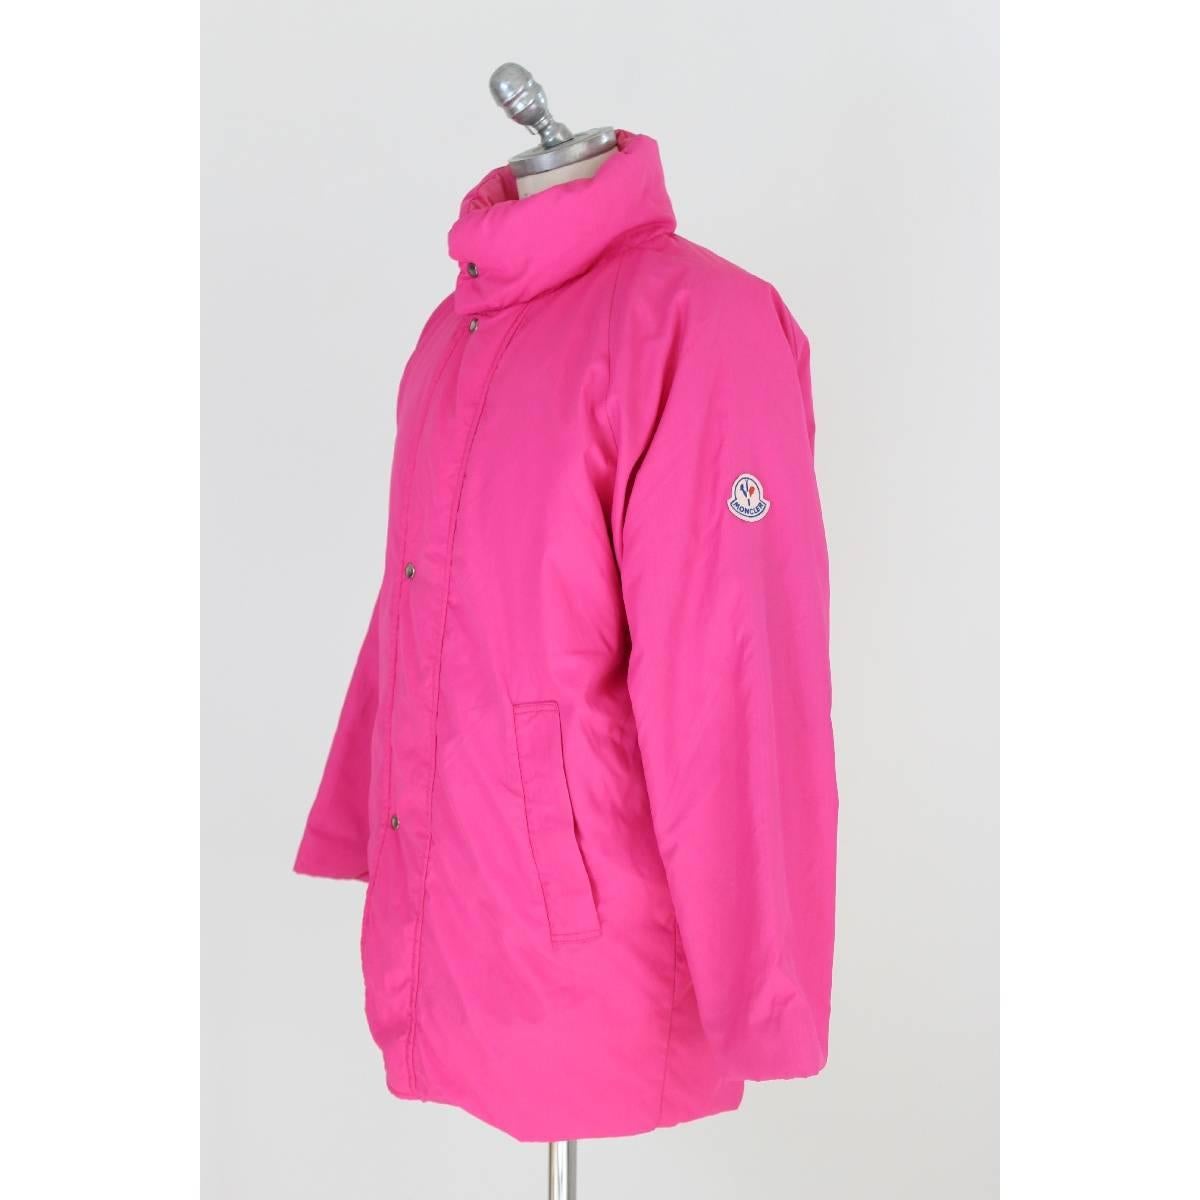 Moncler pink down jacket for women bomber snow style, clip closure with buttons, high collar, two pockets on the sides, inside pink glossy, 100% polyamide. Excellent vintage conditions.

Size 42 It 8 Us 10 Uk 36 Fr 38 De

Shoulder: 44 cm
Length: 86